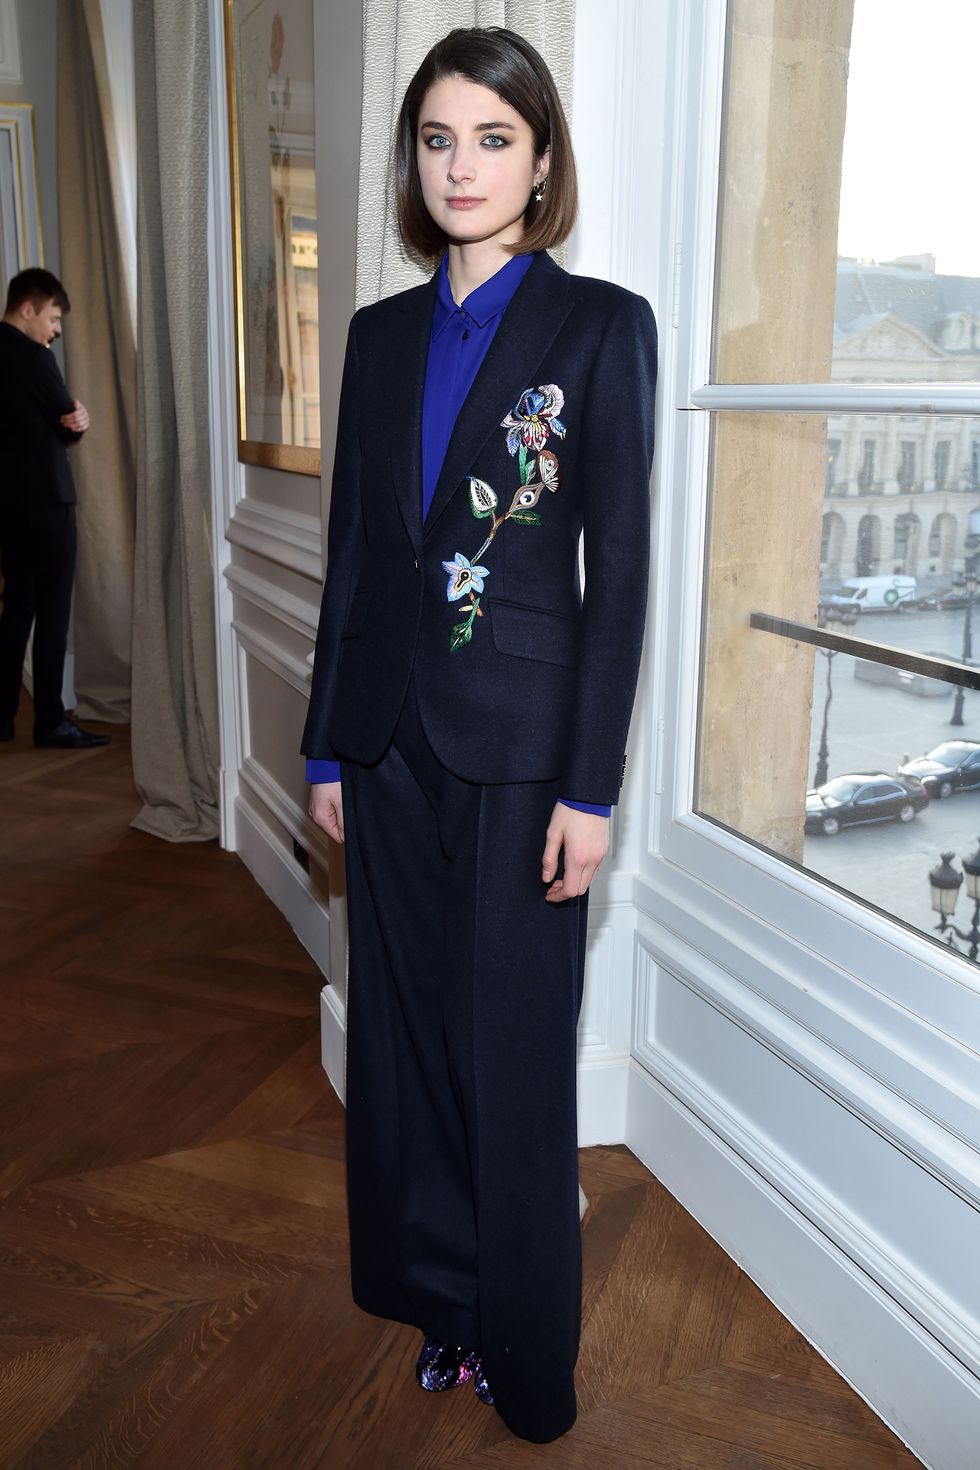 Schiaparelli couture show January spring/summer 2017 - front row celebrities in Paris